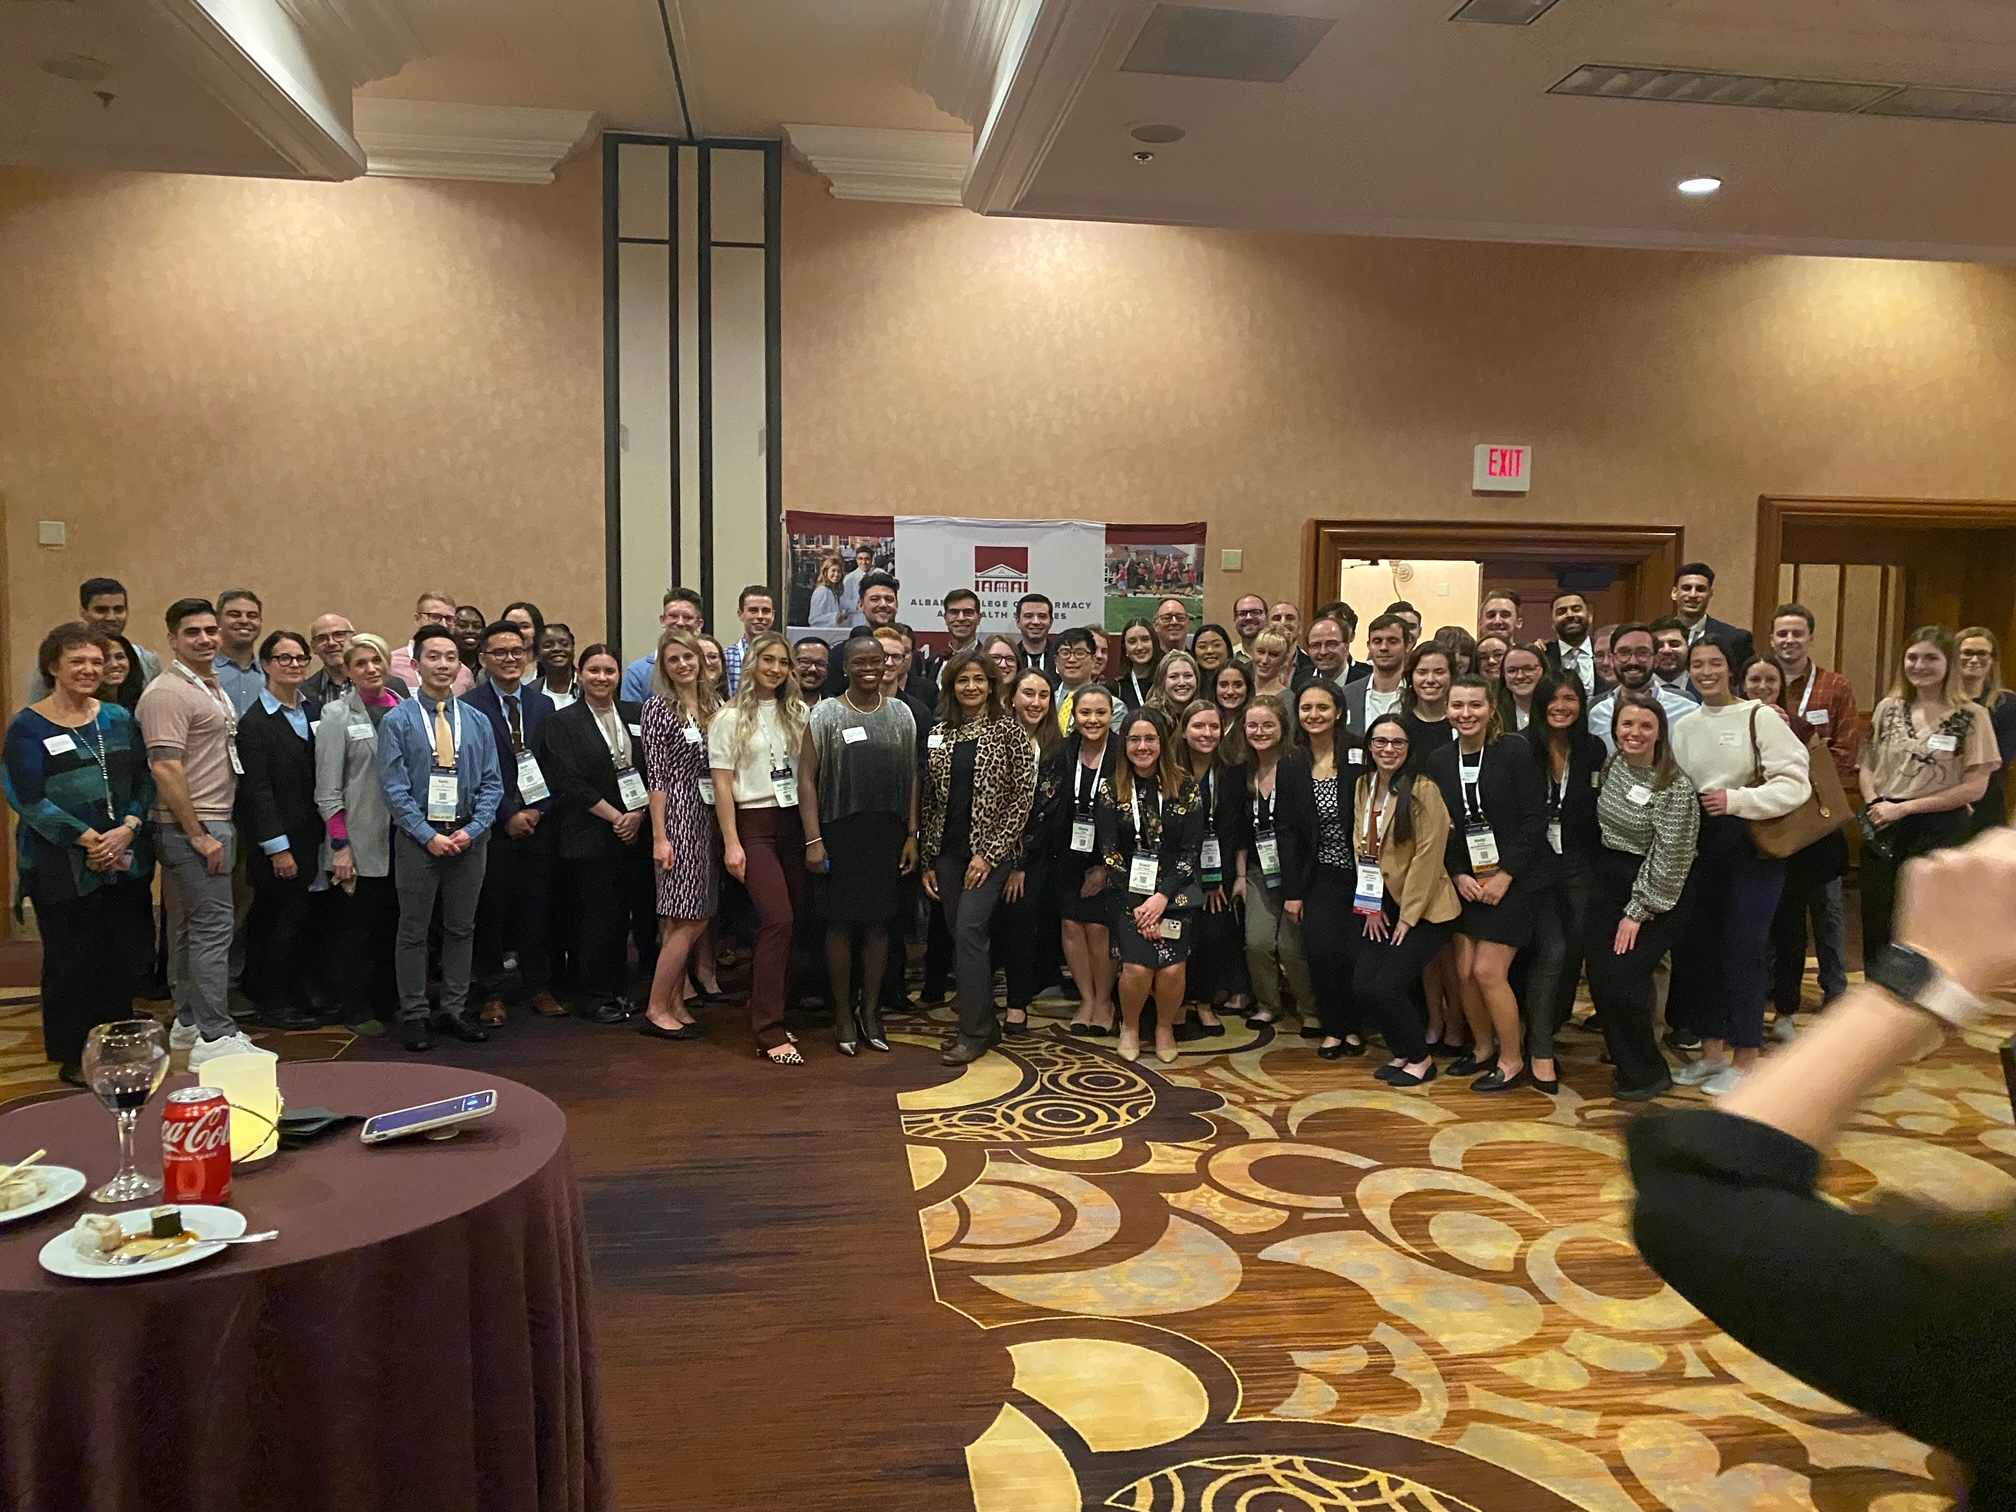 ACPHS Takes Center Stage at MidYear Clinical Meeting in Las Vegas